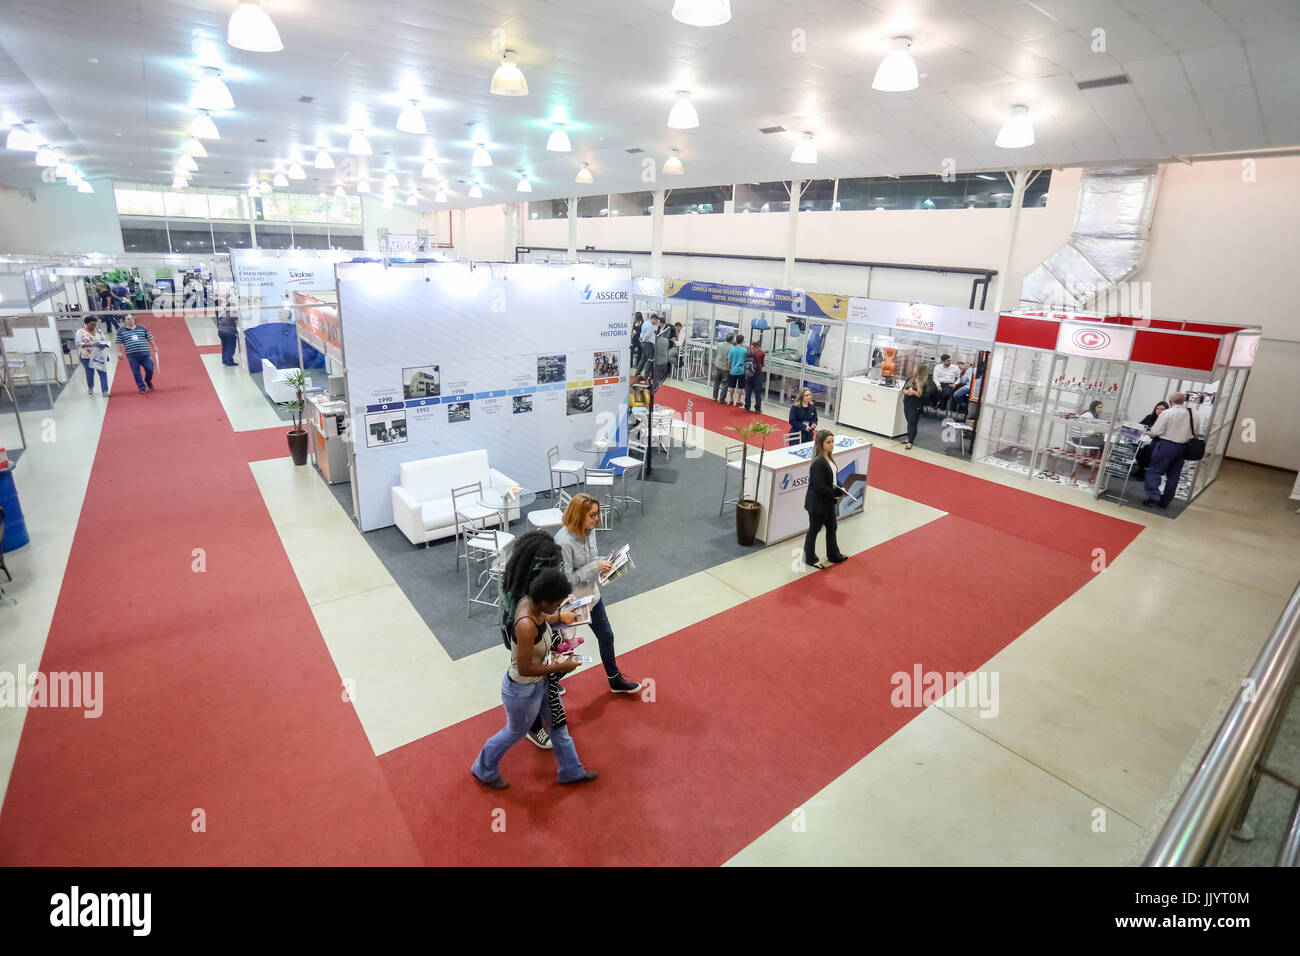 SÃO JOSÉ DOS CAMPOS, SP - 21.07.2017: FEISSECRE FEIRA DE TECNOLOGIA INDÚSTRIAL - The Industry Technology Fair (Feisecre) is in its 19th exhibition of innovative products and services for the industrial sector in São José dos Campos. The main objective of the fair is to offer the opportunity to strengthen relationships and introduce new companies. (Photo: Luis Lima Jr/Fotoarena) Stock Photo